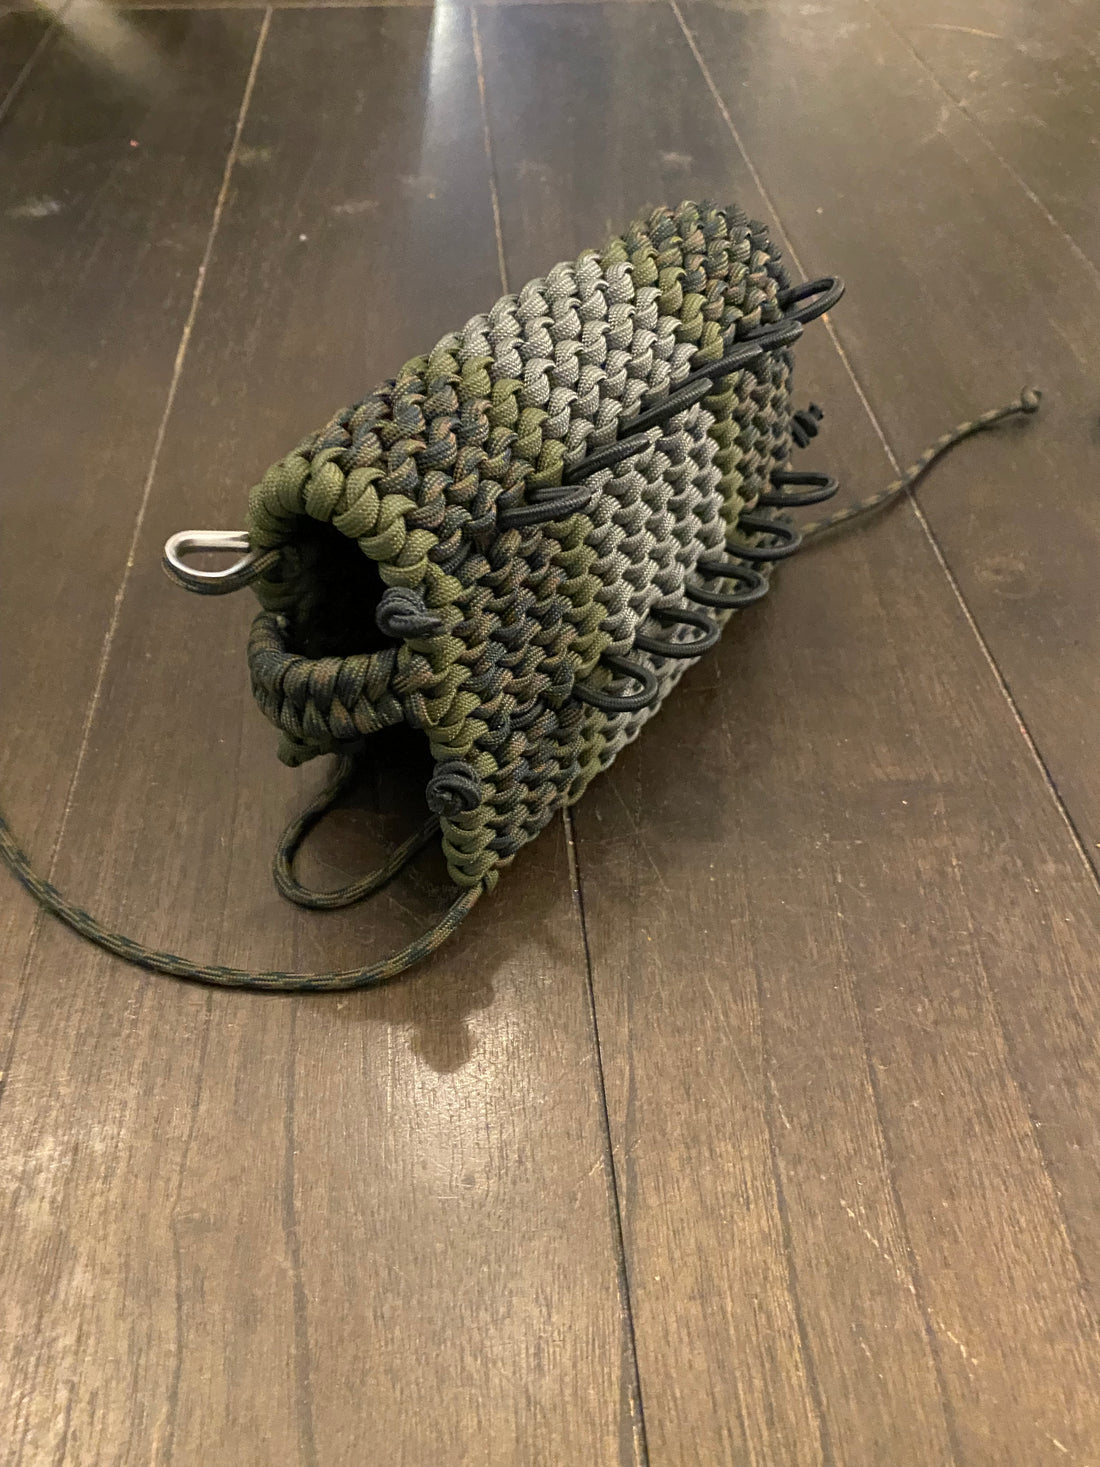 Paracord Ammuntion Holders: The First of Many New Paracord Firearm Accessories